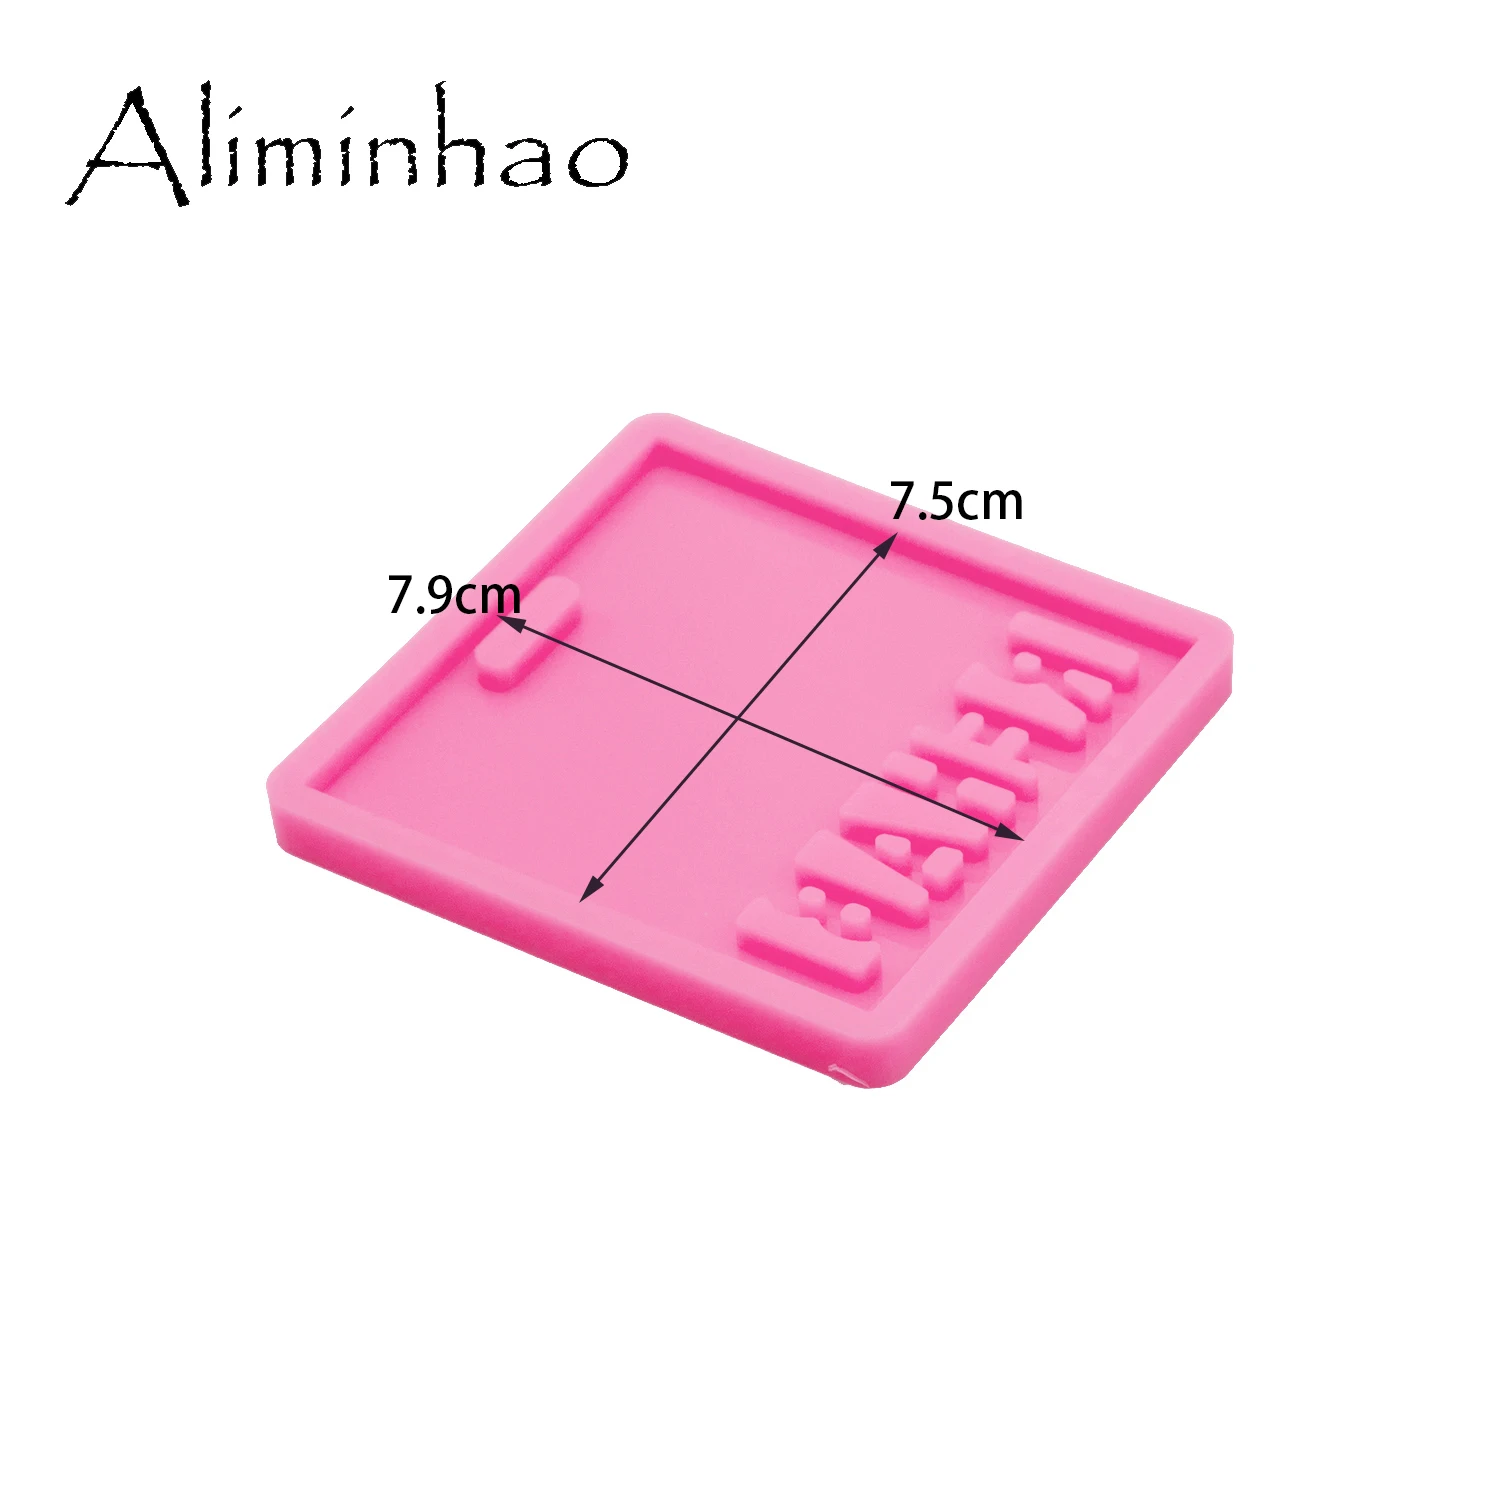 DY1155 Resin Mold for CMA, LPN, LVN, RN, NURSE, XRAY Badge Backing, Shiny Silicone Mold Resin Craft